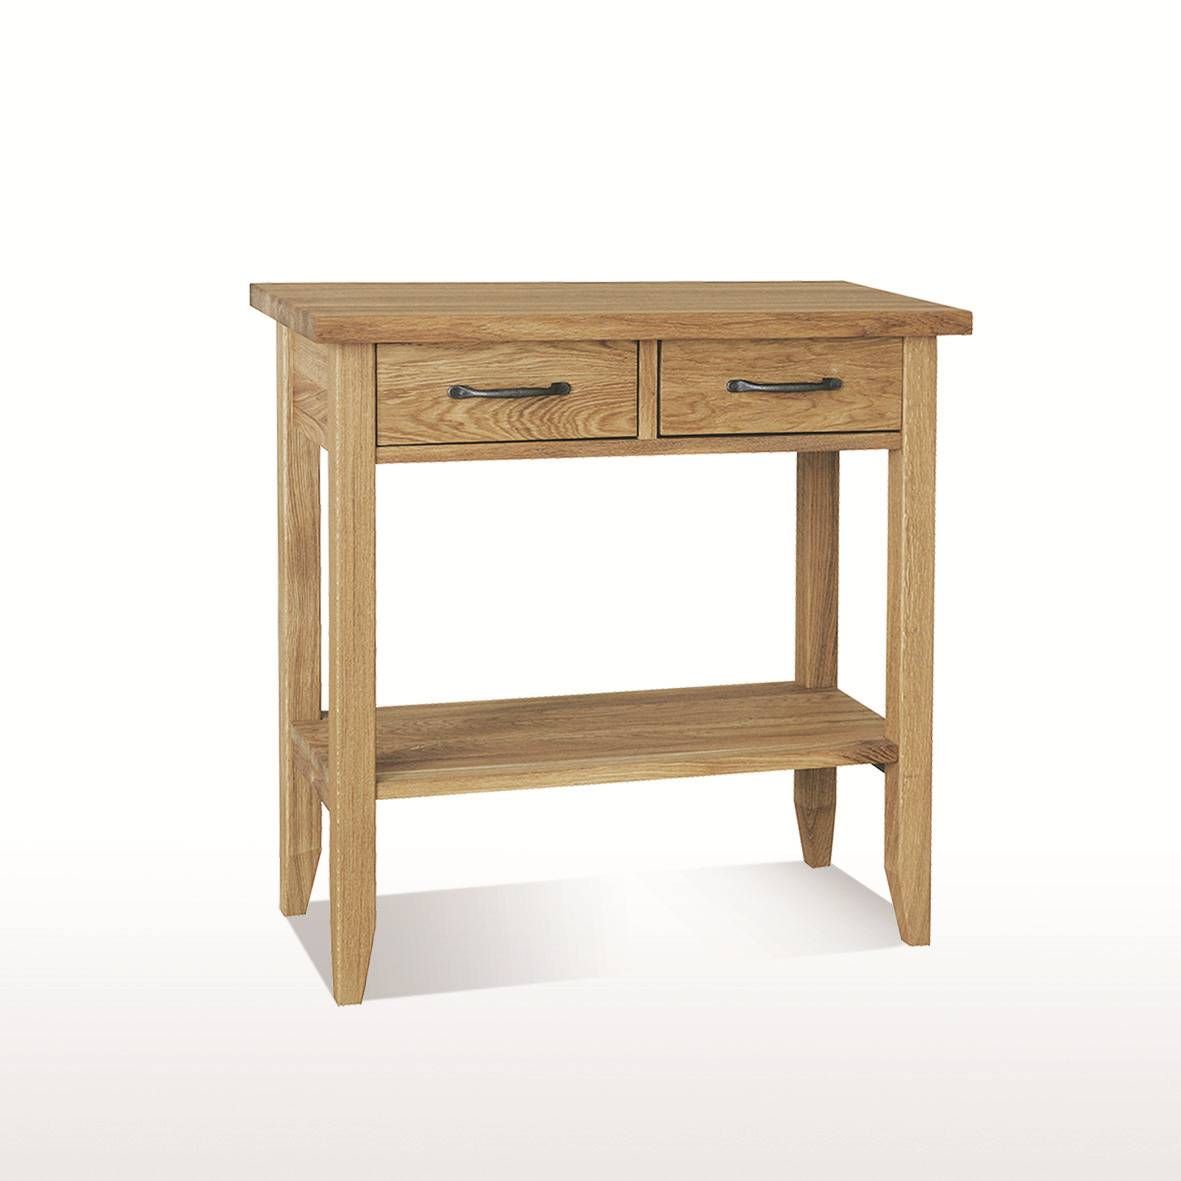 Windsor Dining Console Table 2 Drawers With Shelf In 2 Shelf Console Tables (View 13 of 20)